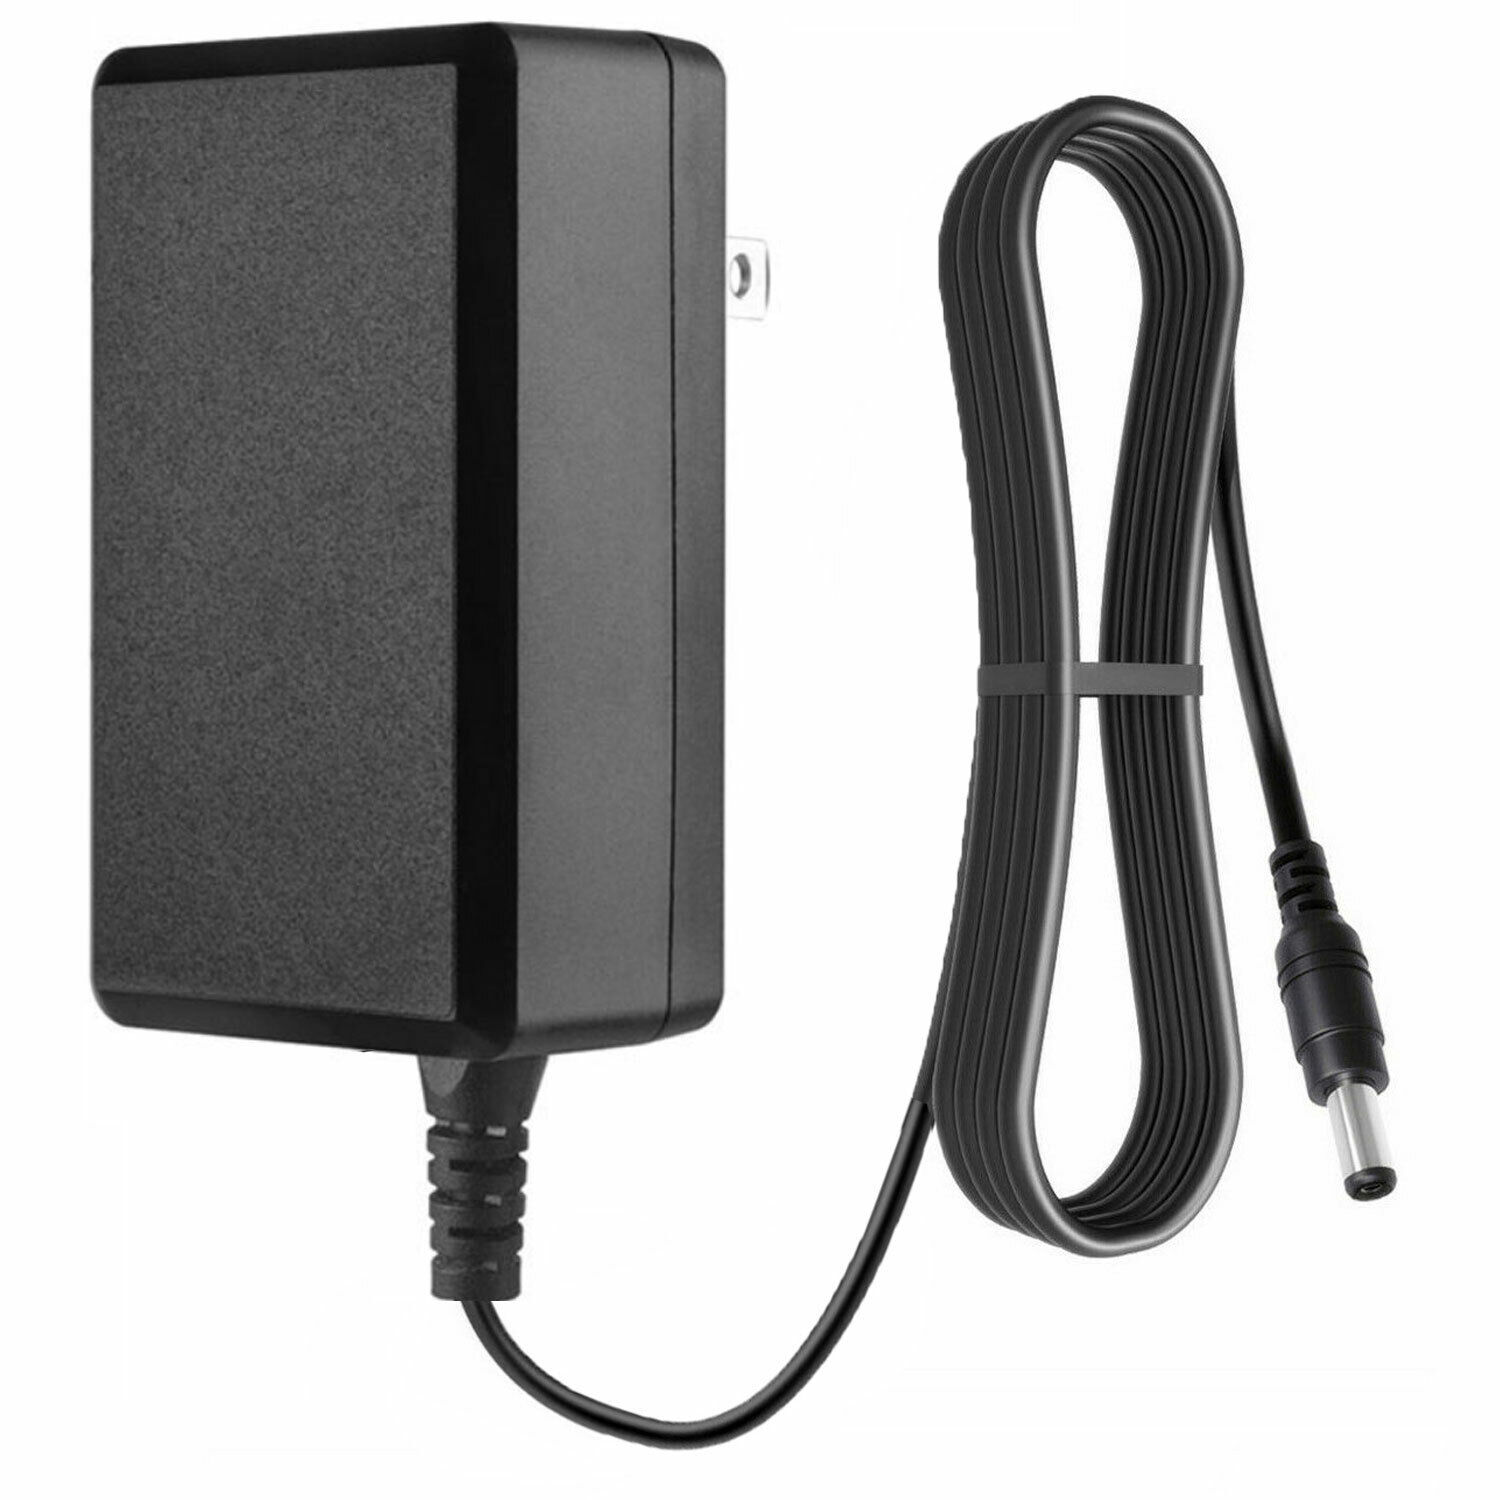 AC Adapter Charger for Lenovo Miix 2 10 Tablet PC Tab Power Supply Cord 12V Compa